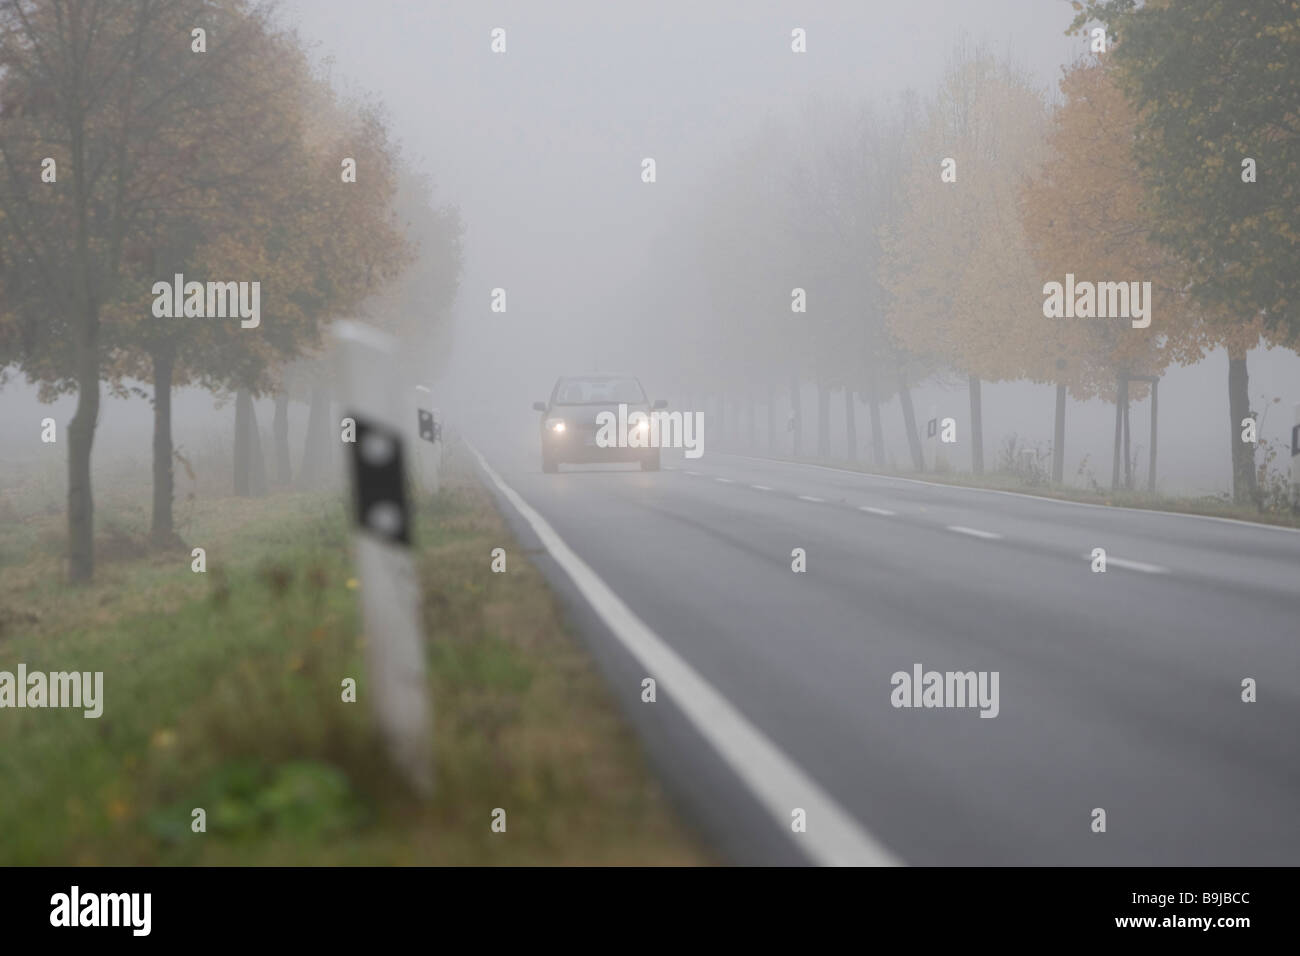 Car driving with dimmed headlights on a country road in dense fog, Hesse, Germany, Europe Stock Photo